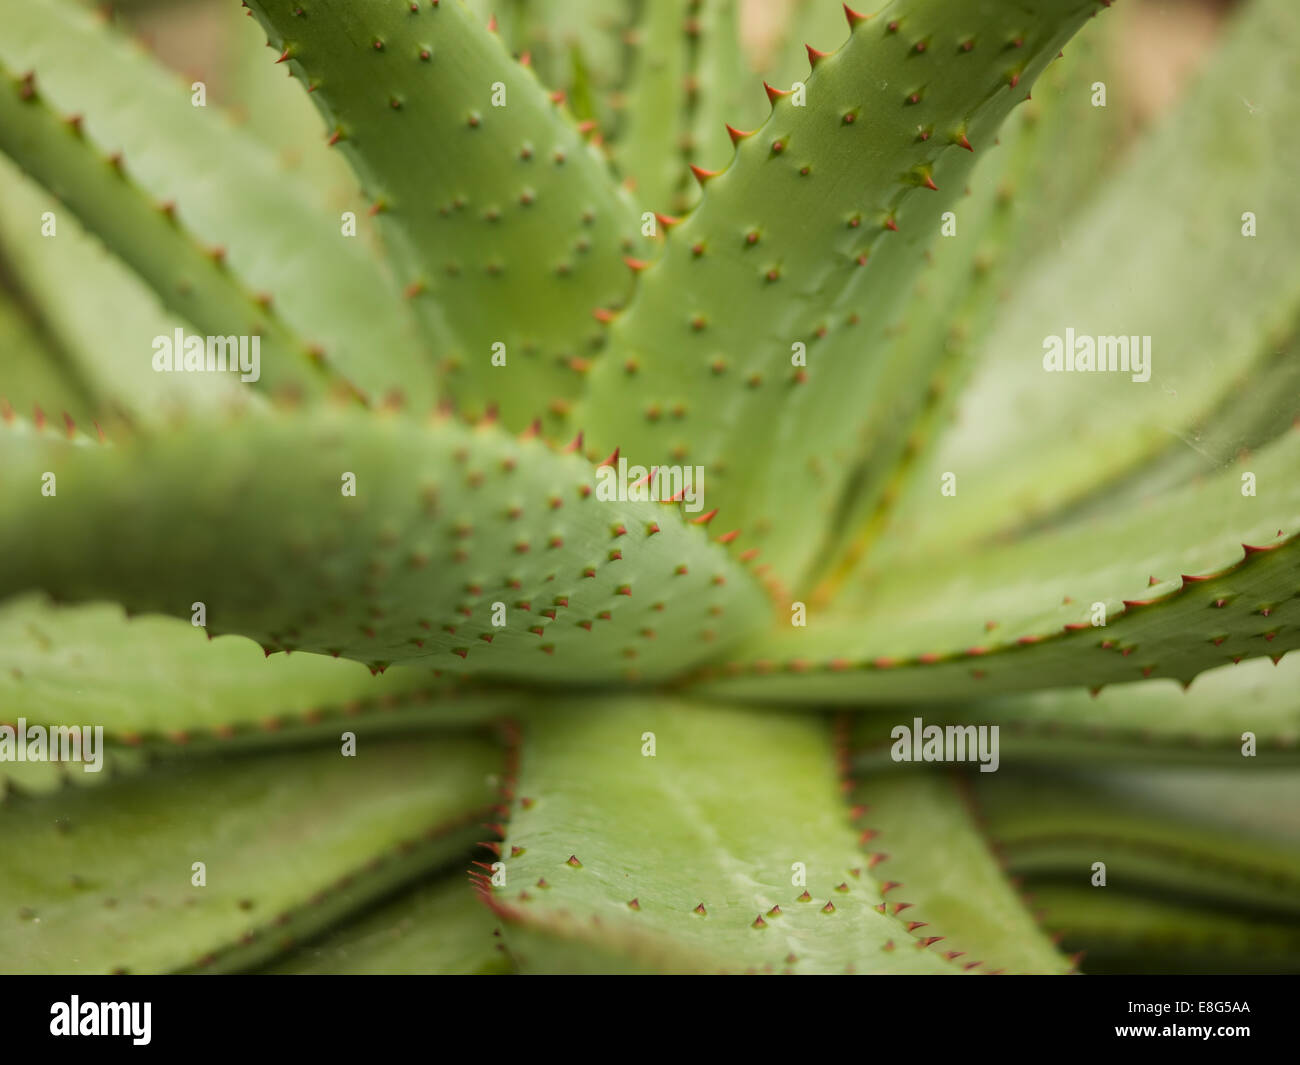 A detail shot of an Aloe plant. Stock Photo